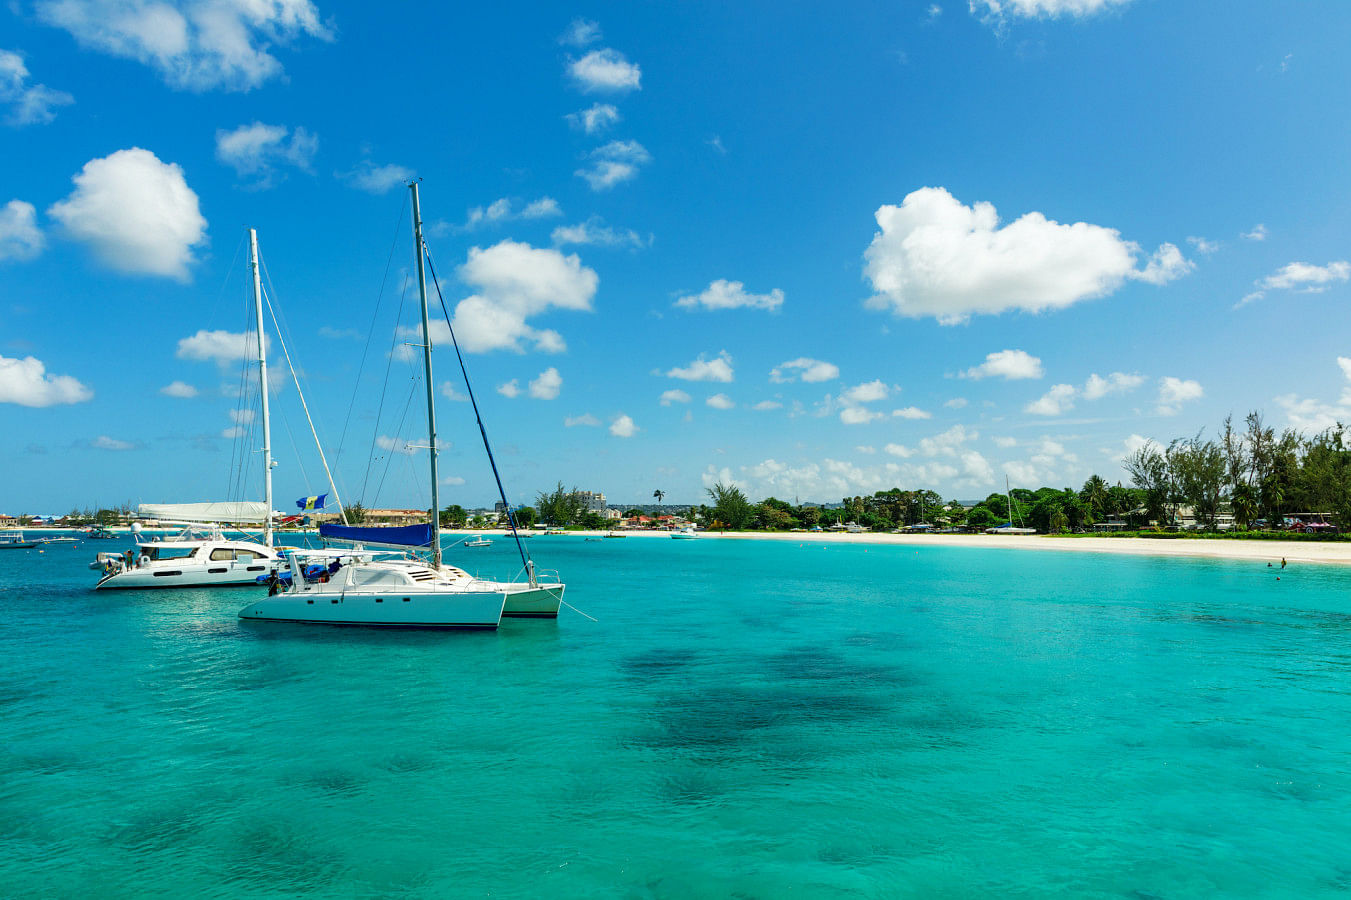 Rent a boat in Barbados